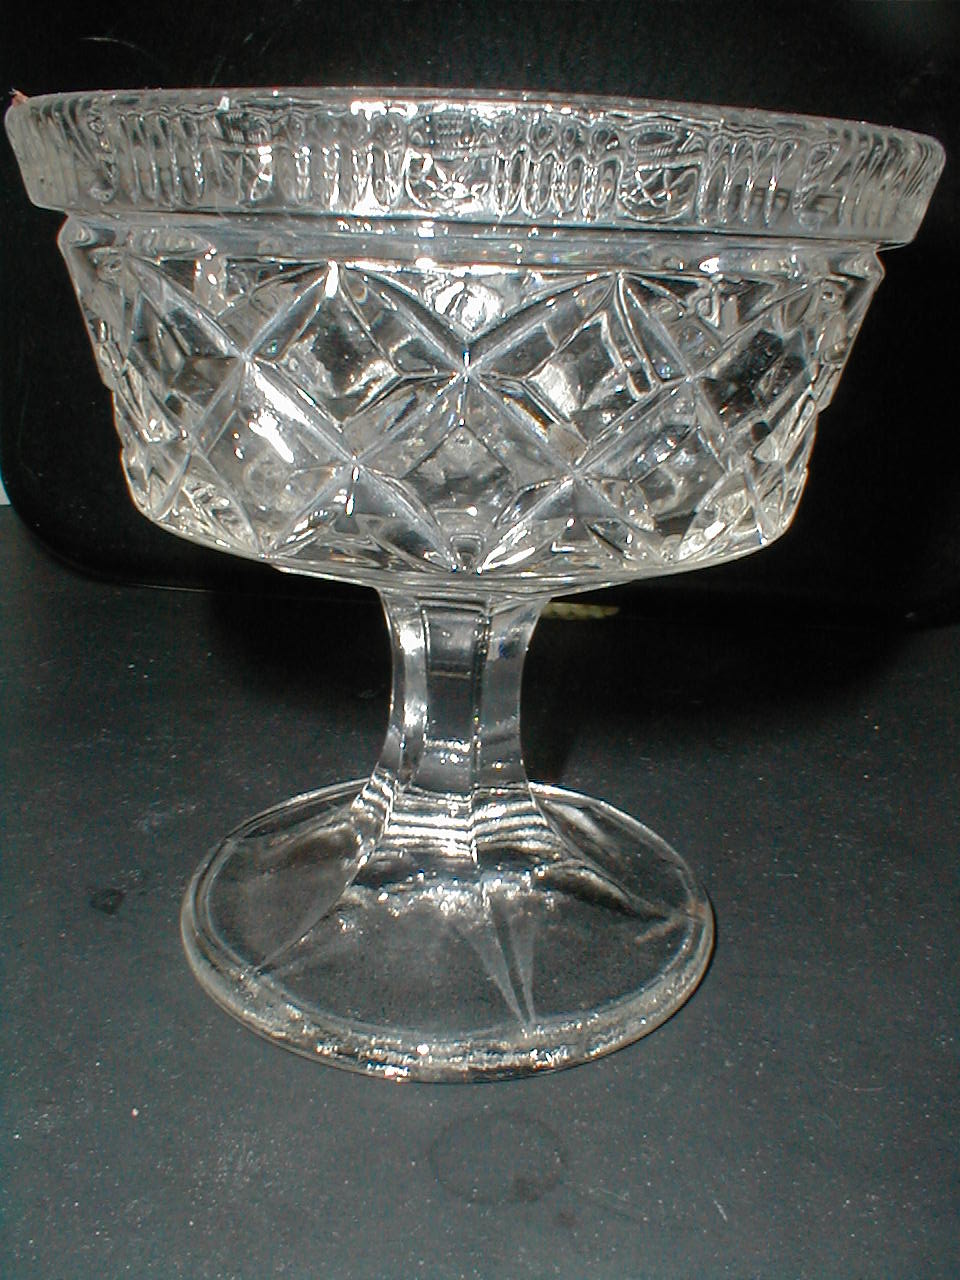 clear glass jelly compote pedestal candy dish july 25 2020 018.JPG